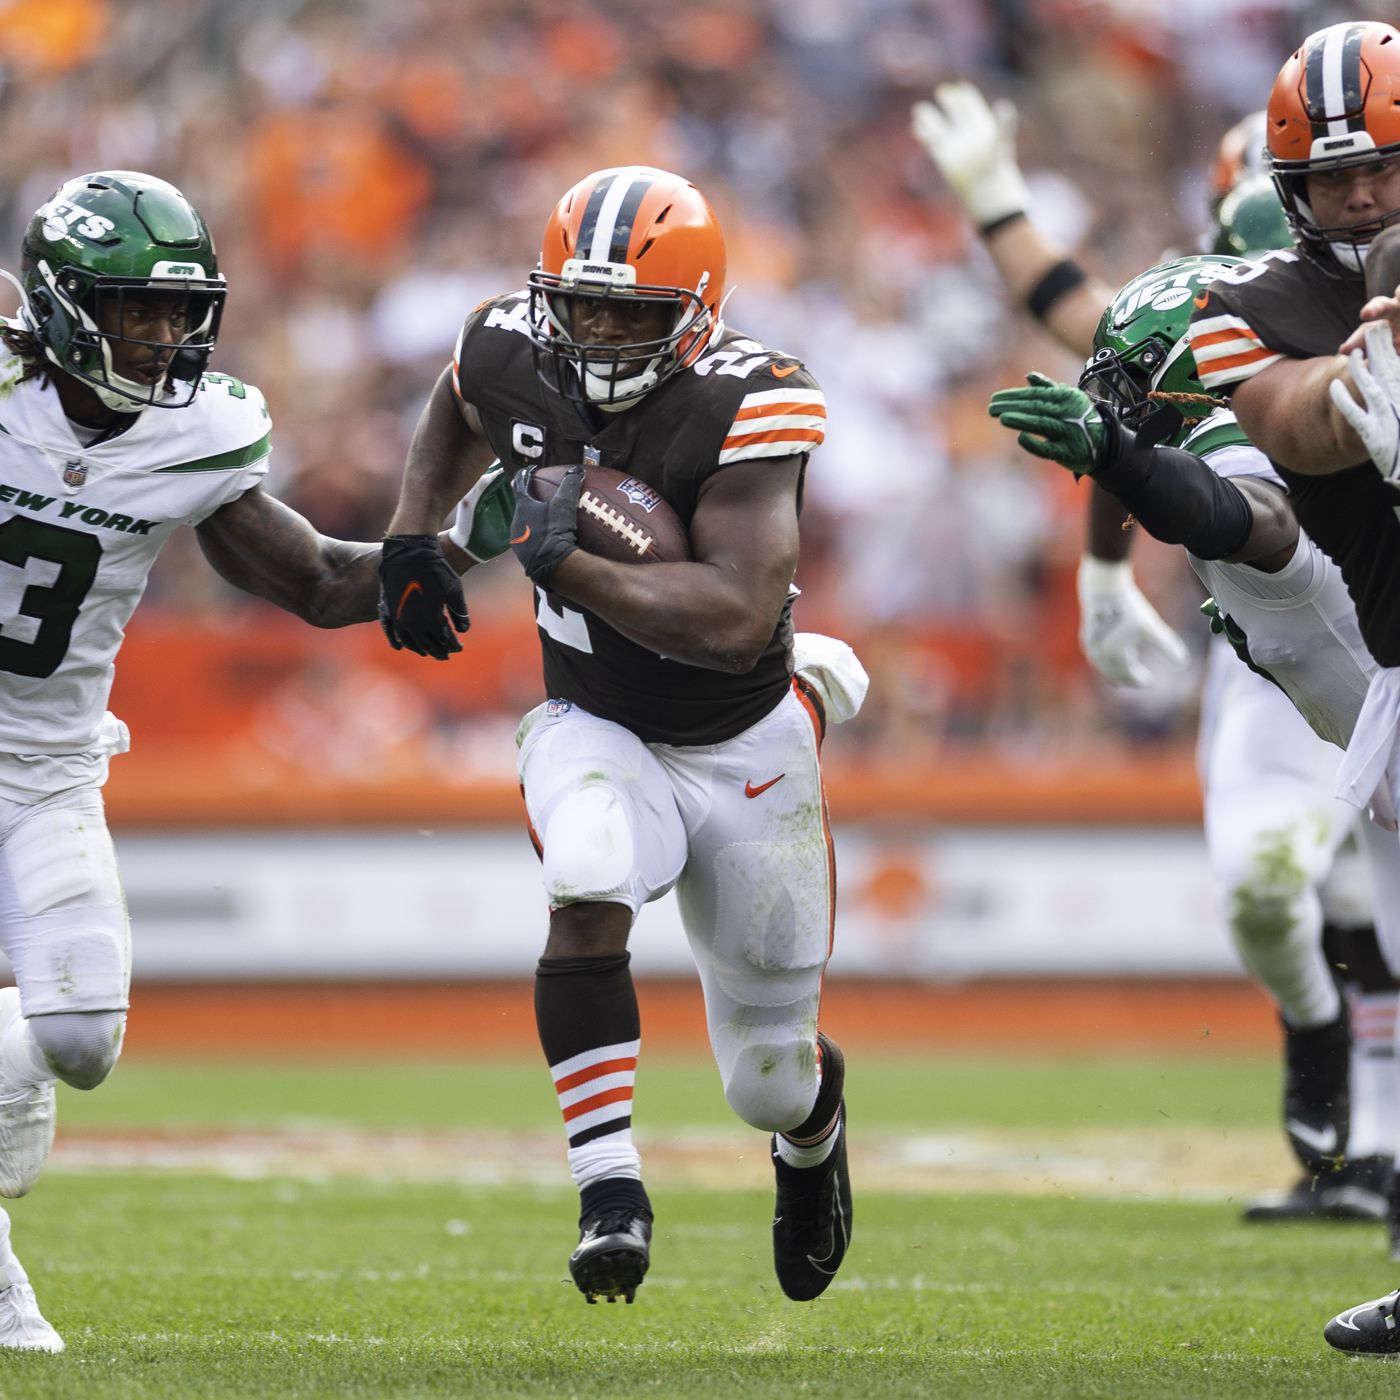 The Cleveland Browns face off against the New York Jets in the